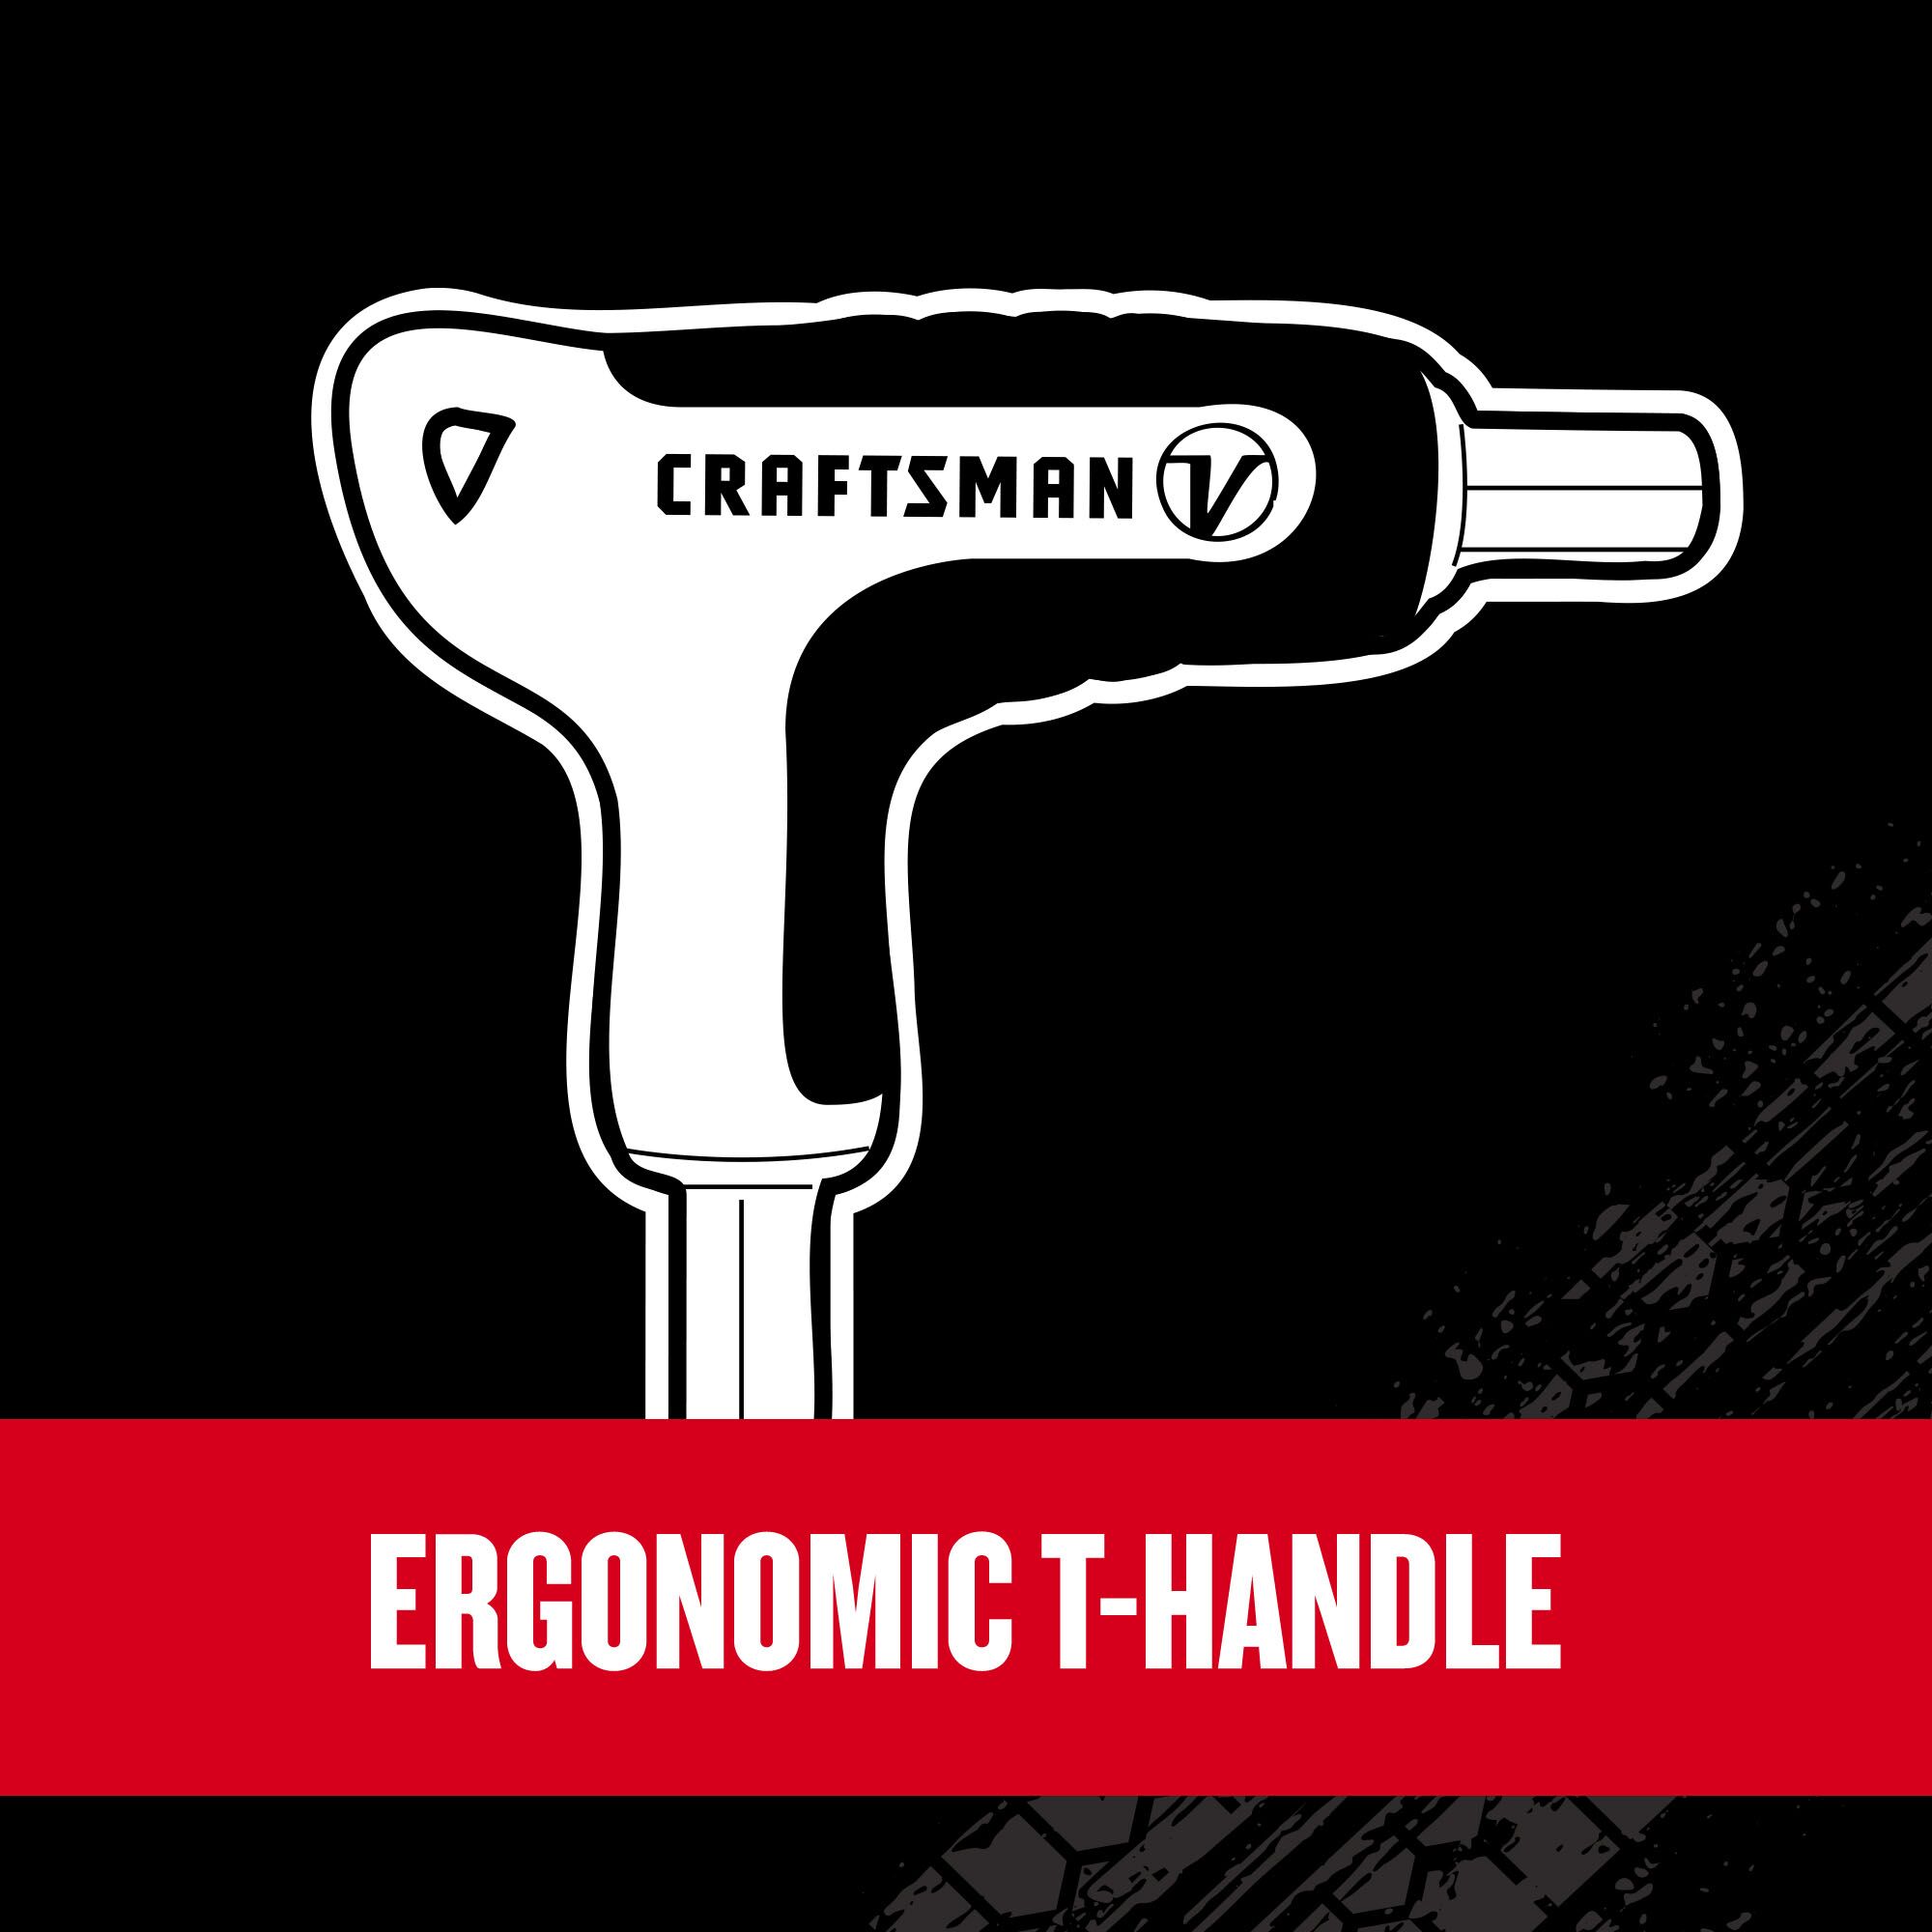 Graphic of CRAFTSMAN Screwdrivers: Hex Keys highlighting product features